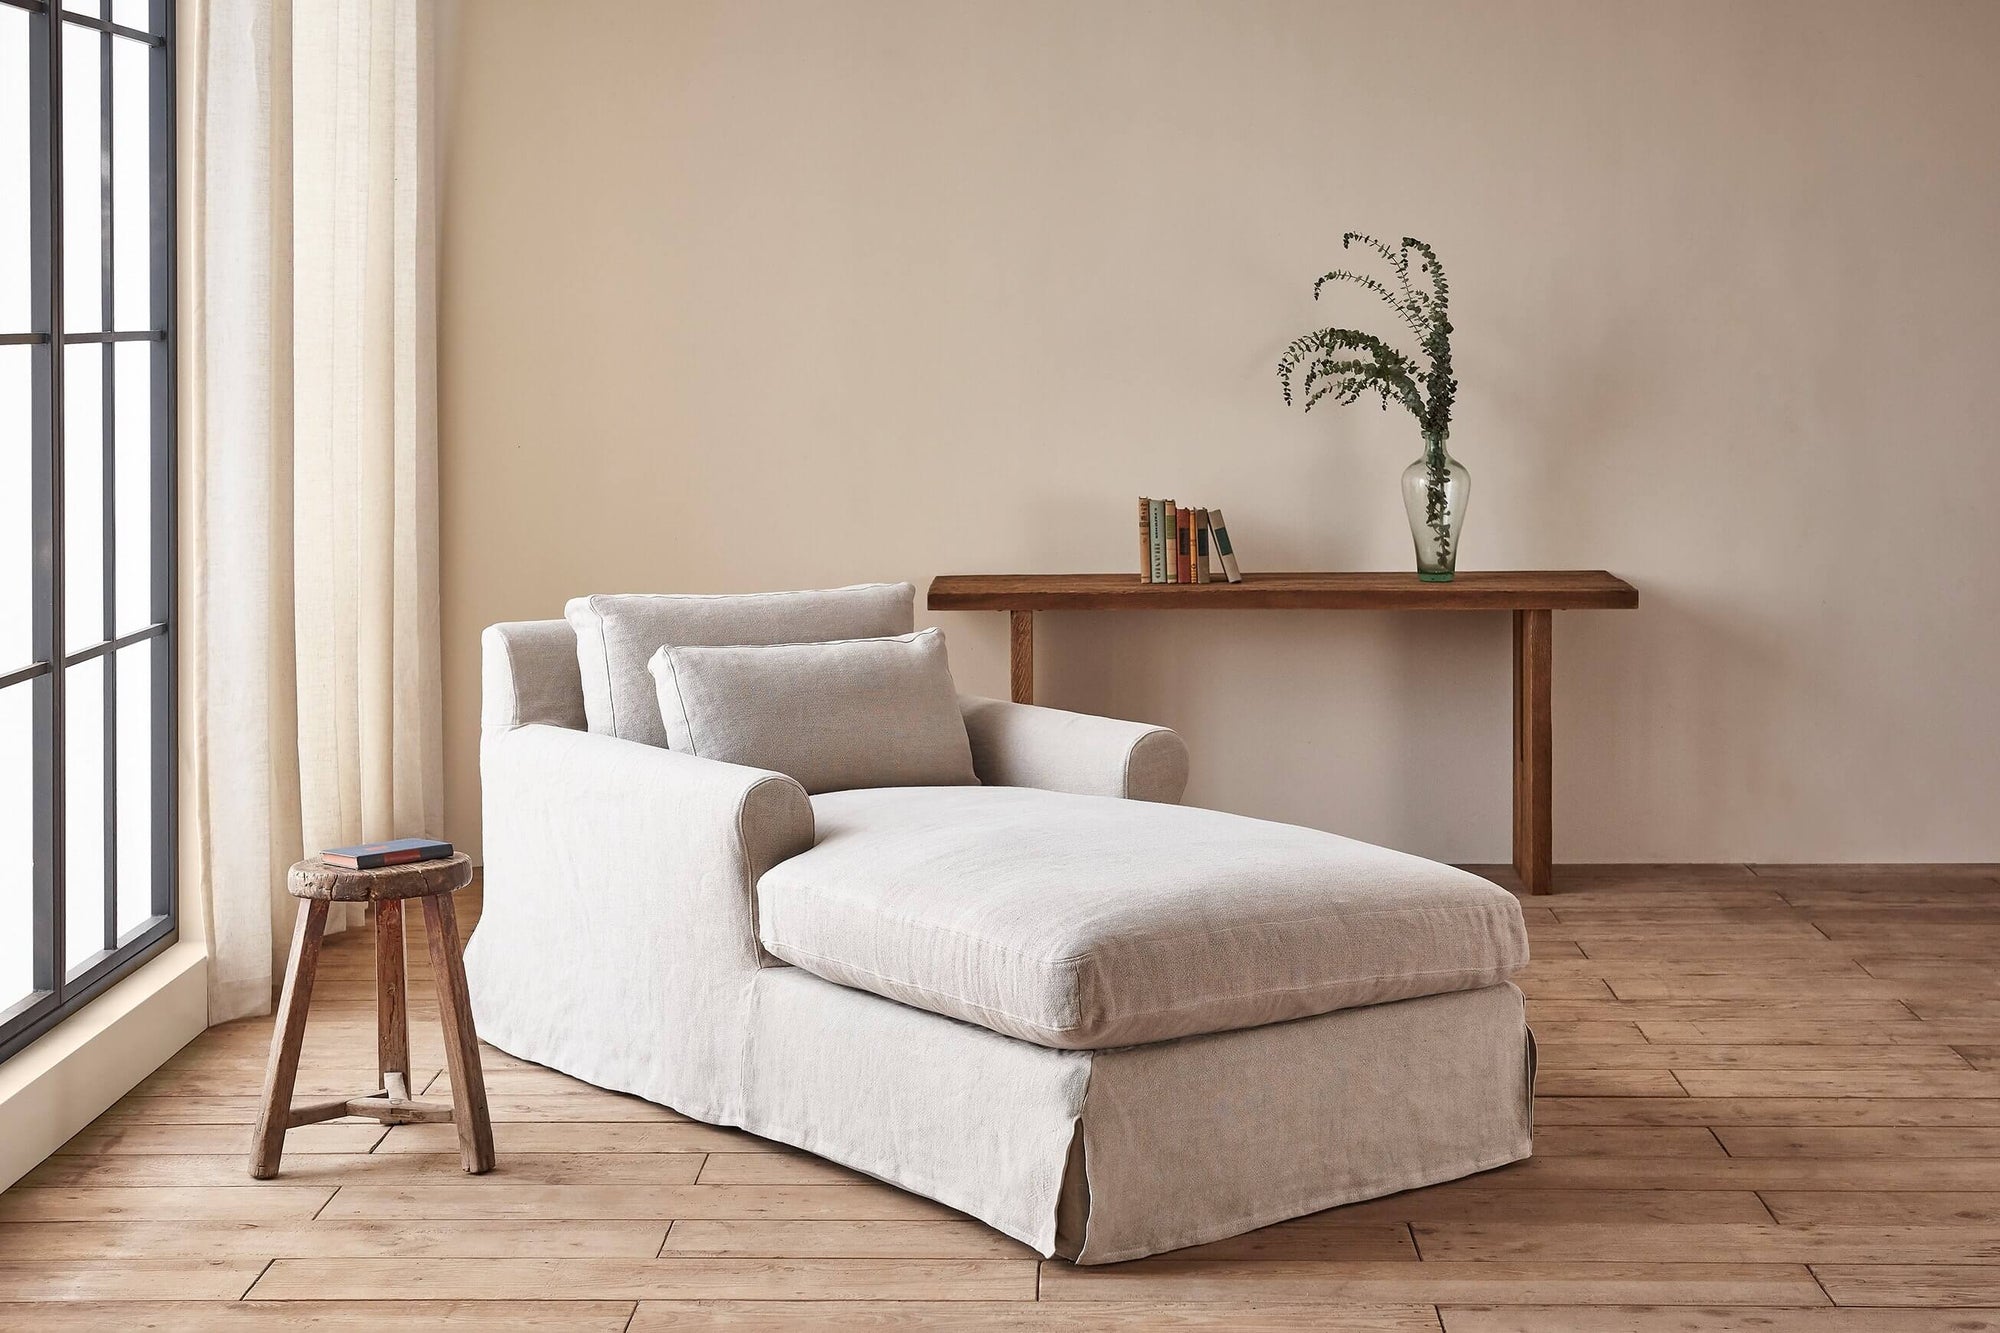 Elias Daybed in Jasmine Rice, a light warm greige Medium Weight Linen, placed in a sunlit room next to a book on a stool